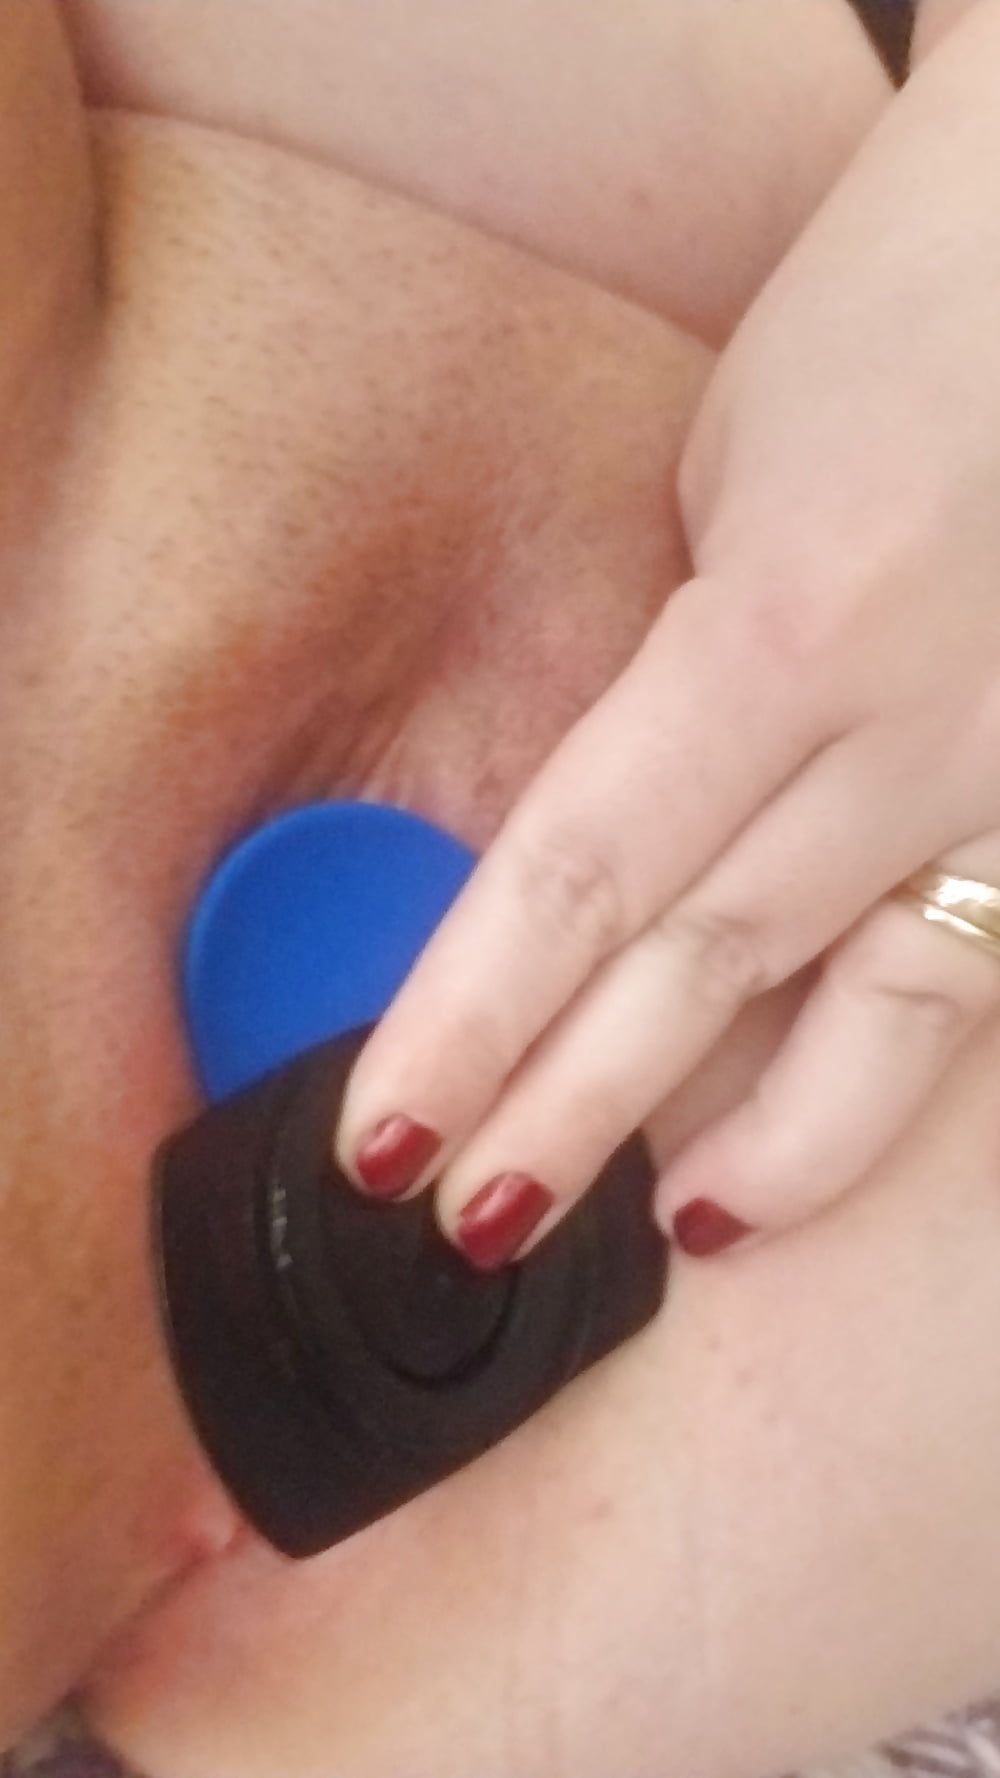 Anal beads linking front to back ..... and other fun milf 